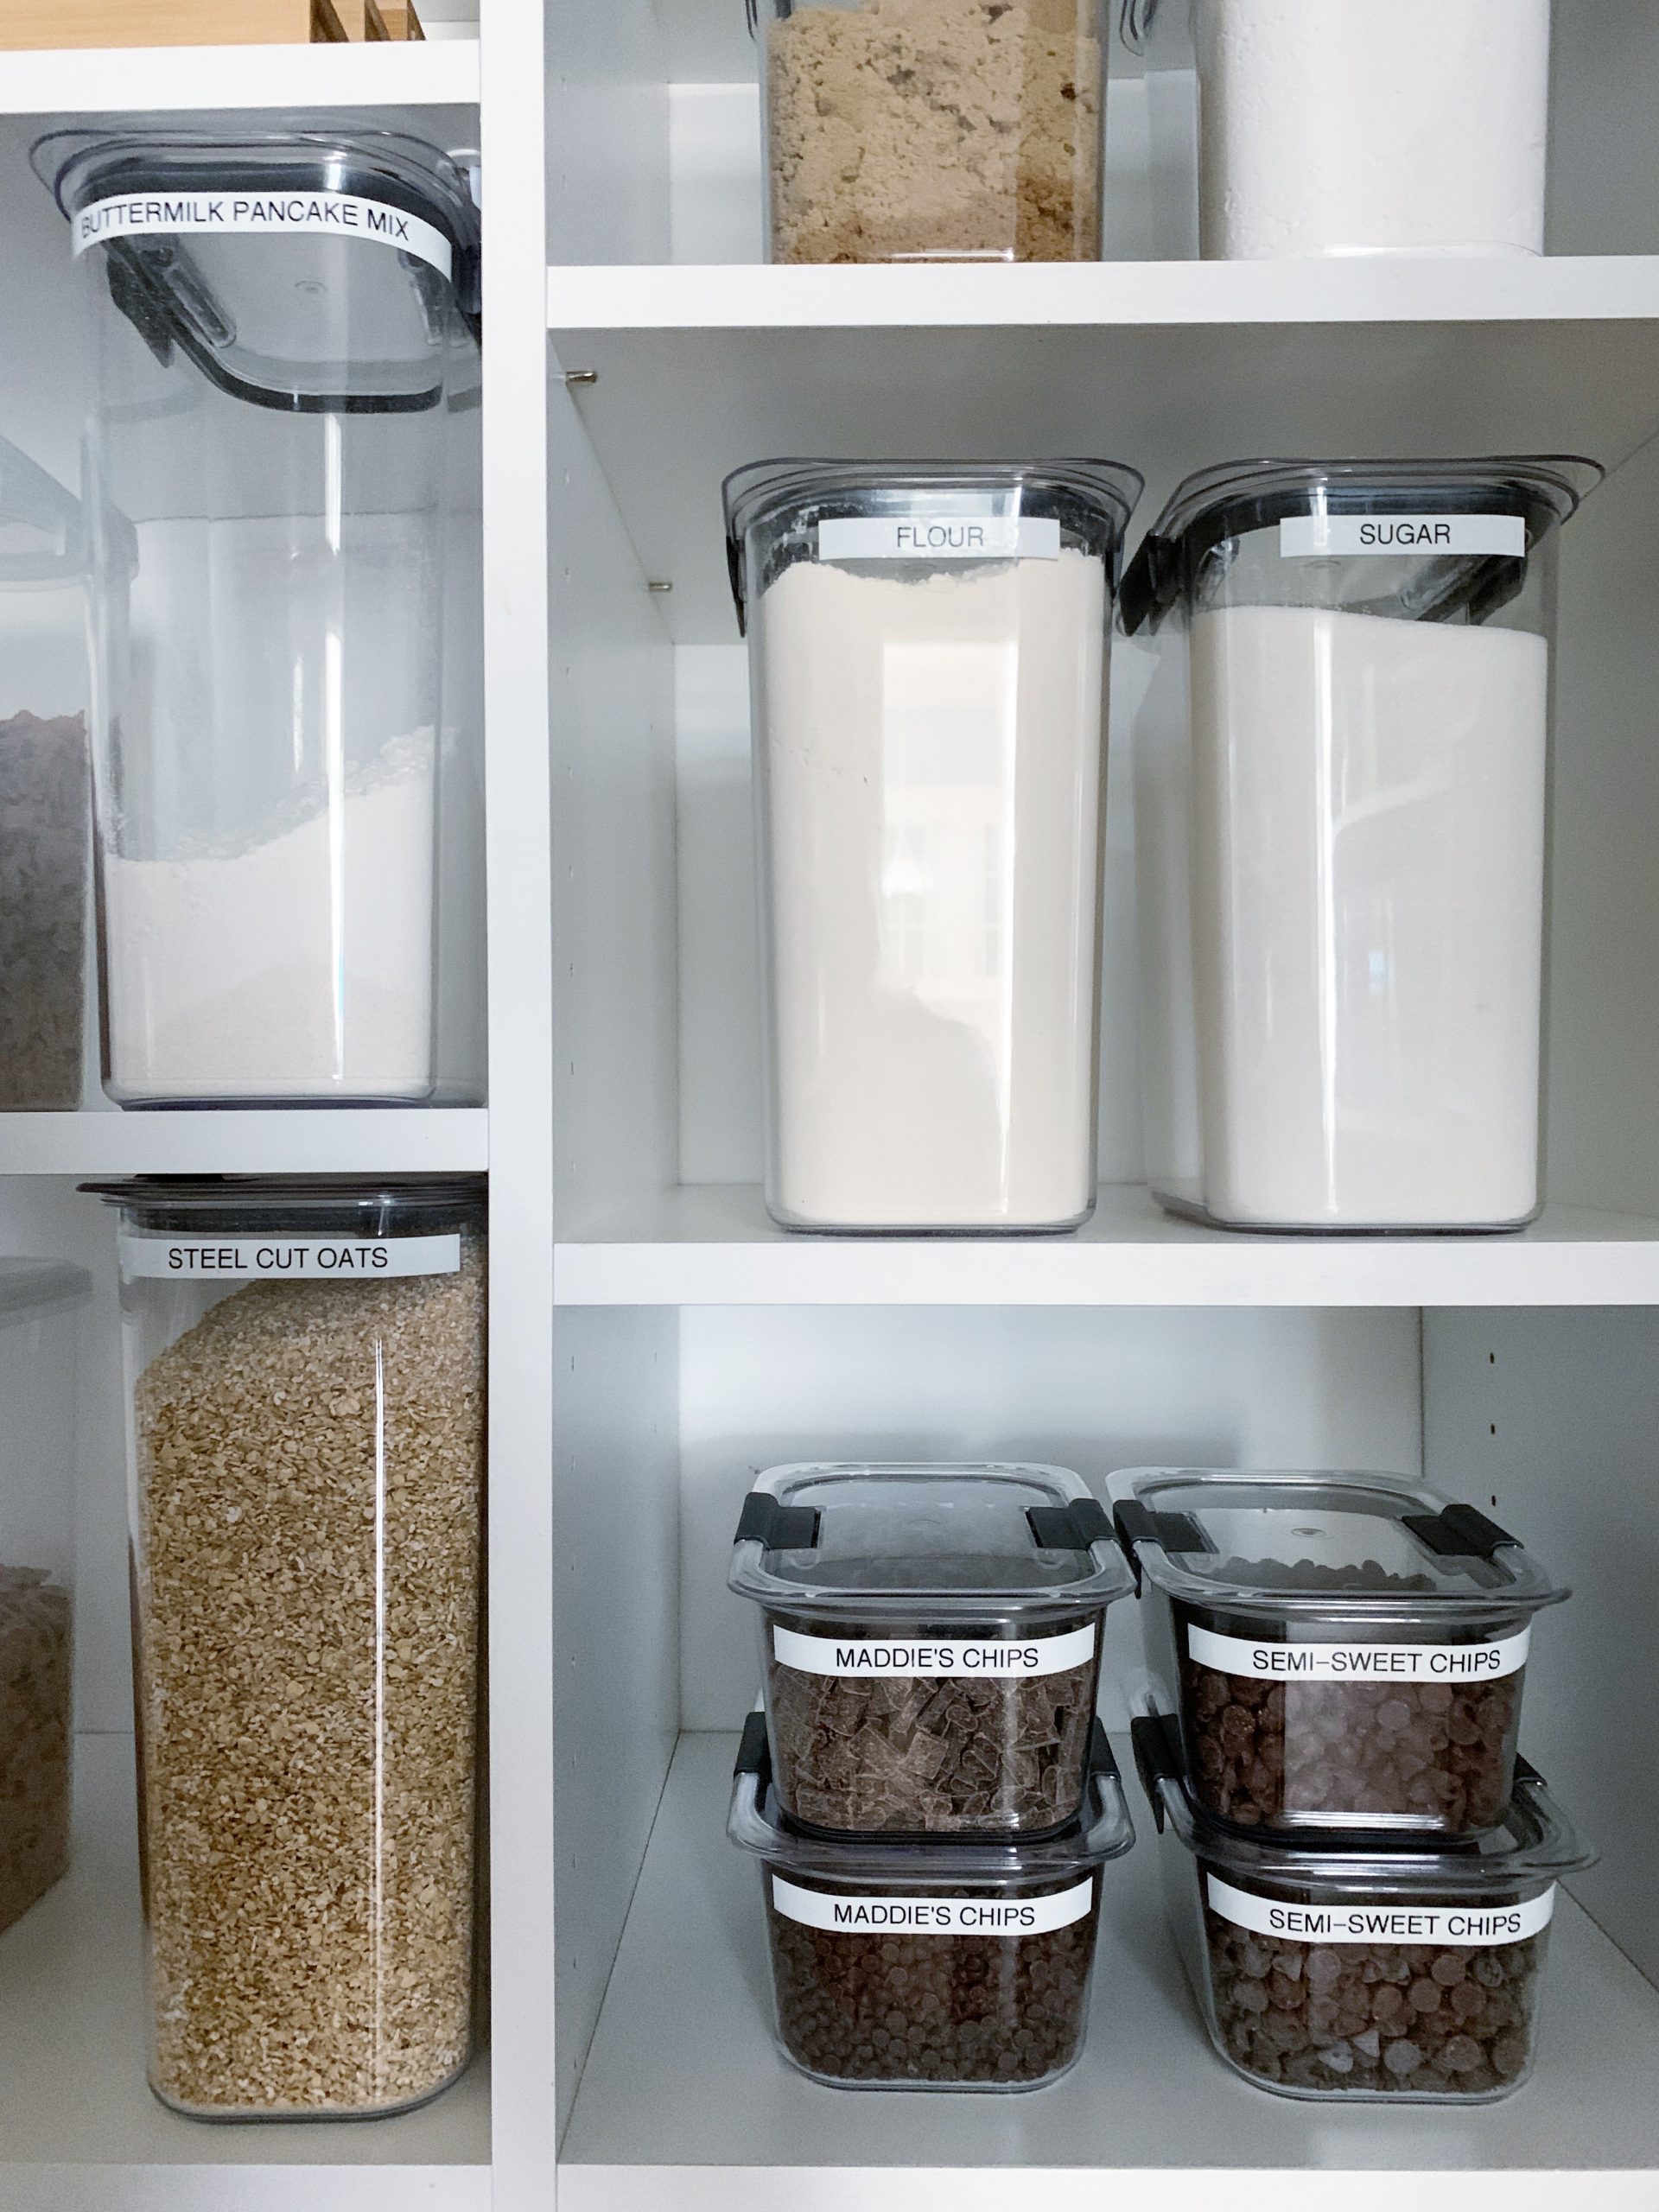 https://simplyorganized.me/wp-content/uploads/2020/04/organized-baking-supplies-in-pantry-containers-scaled.jpg